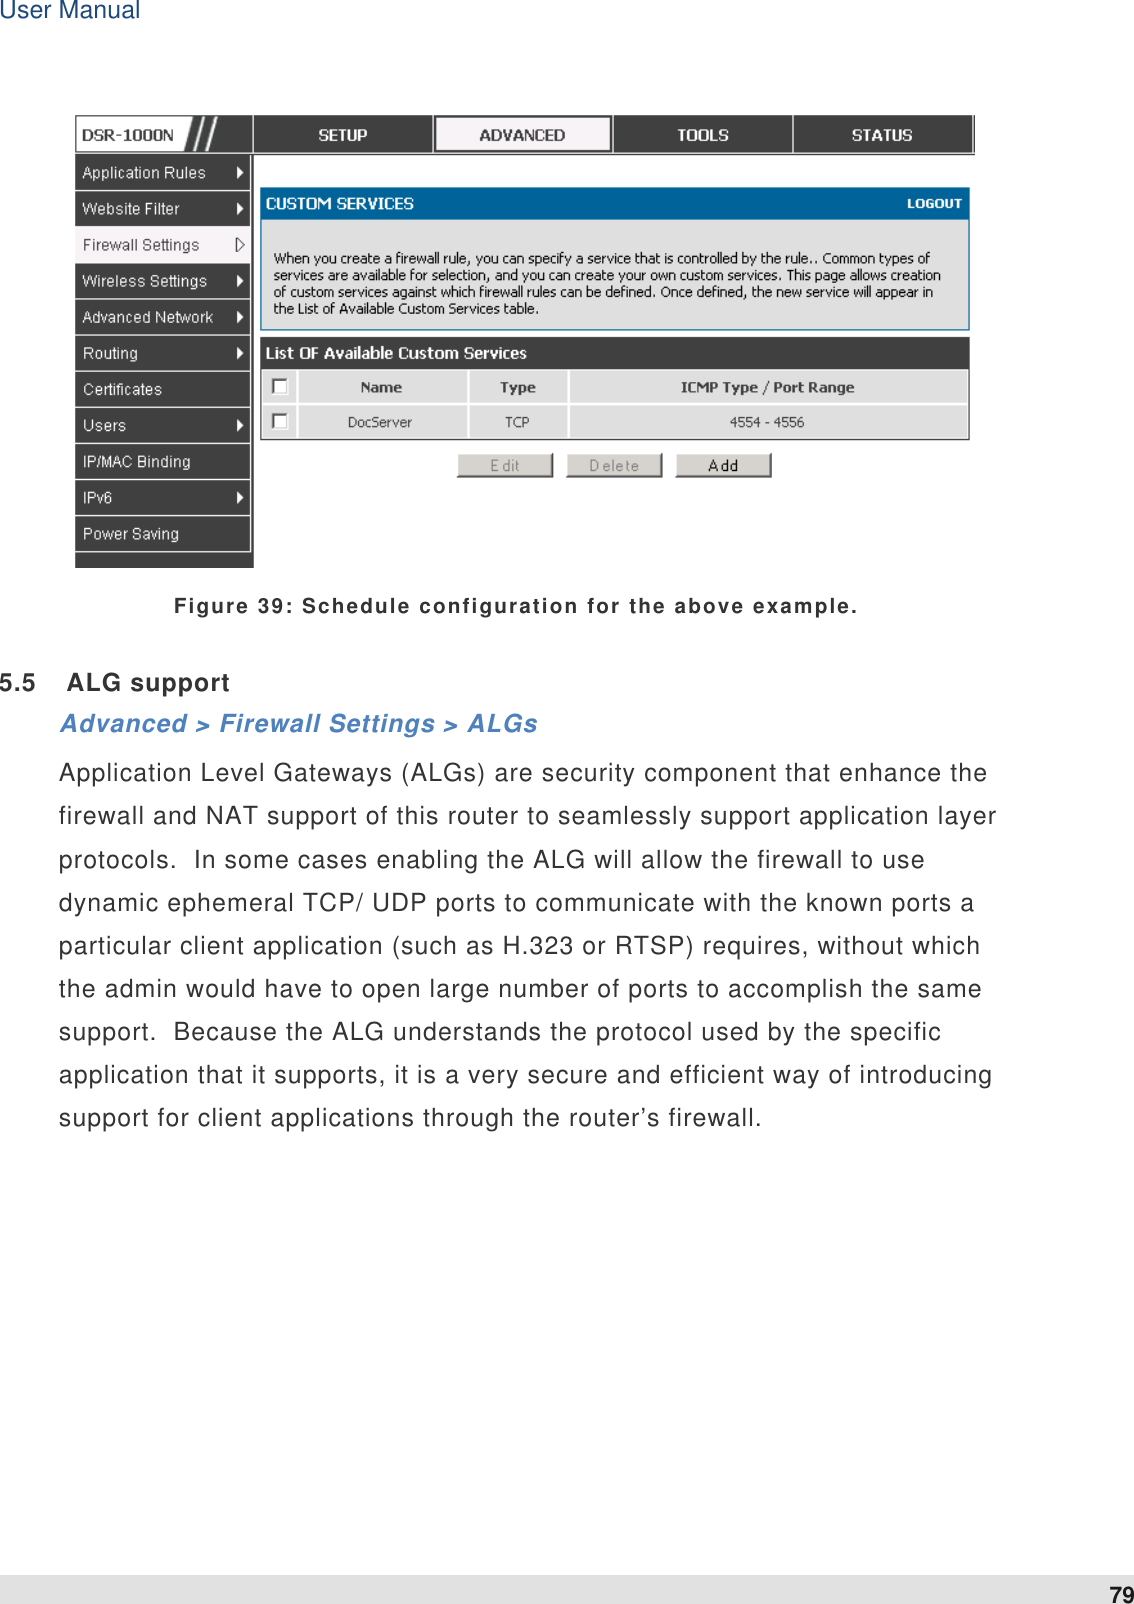 User Manual 79    Figure 39: Schedule configuration for the above example. 5.5  ALG support Advanced &gt; Firewall Settings &gt; ALGs Application Level Gateways (ALGs) are security component that enhance the firewall and NAT support of this router to seamlessly support application layer protocols.  In some cases enabling the ALG will allow the firewall to use dynamic ephemeral TCP/ UDP ports to communicate with the known ports a particular client application (such as H.323 or RTSP) requires, without which the admin would have to open large number of ports to accomplish the same support.  Because the ALG understands the protocol used by the specific application that it supports, it is a very secure and efficient way of introducing support for client applications through the router’s firewall.     